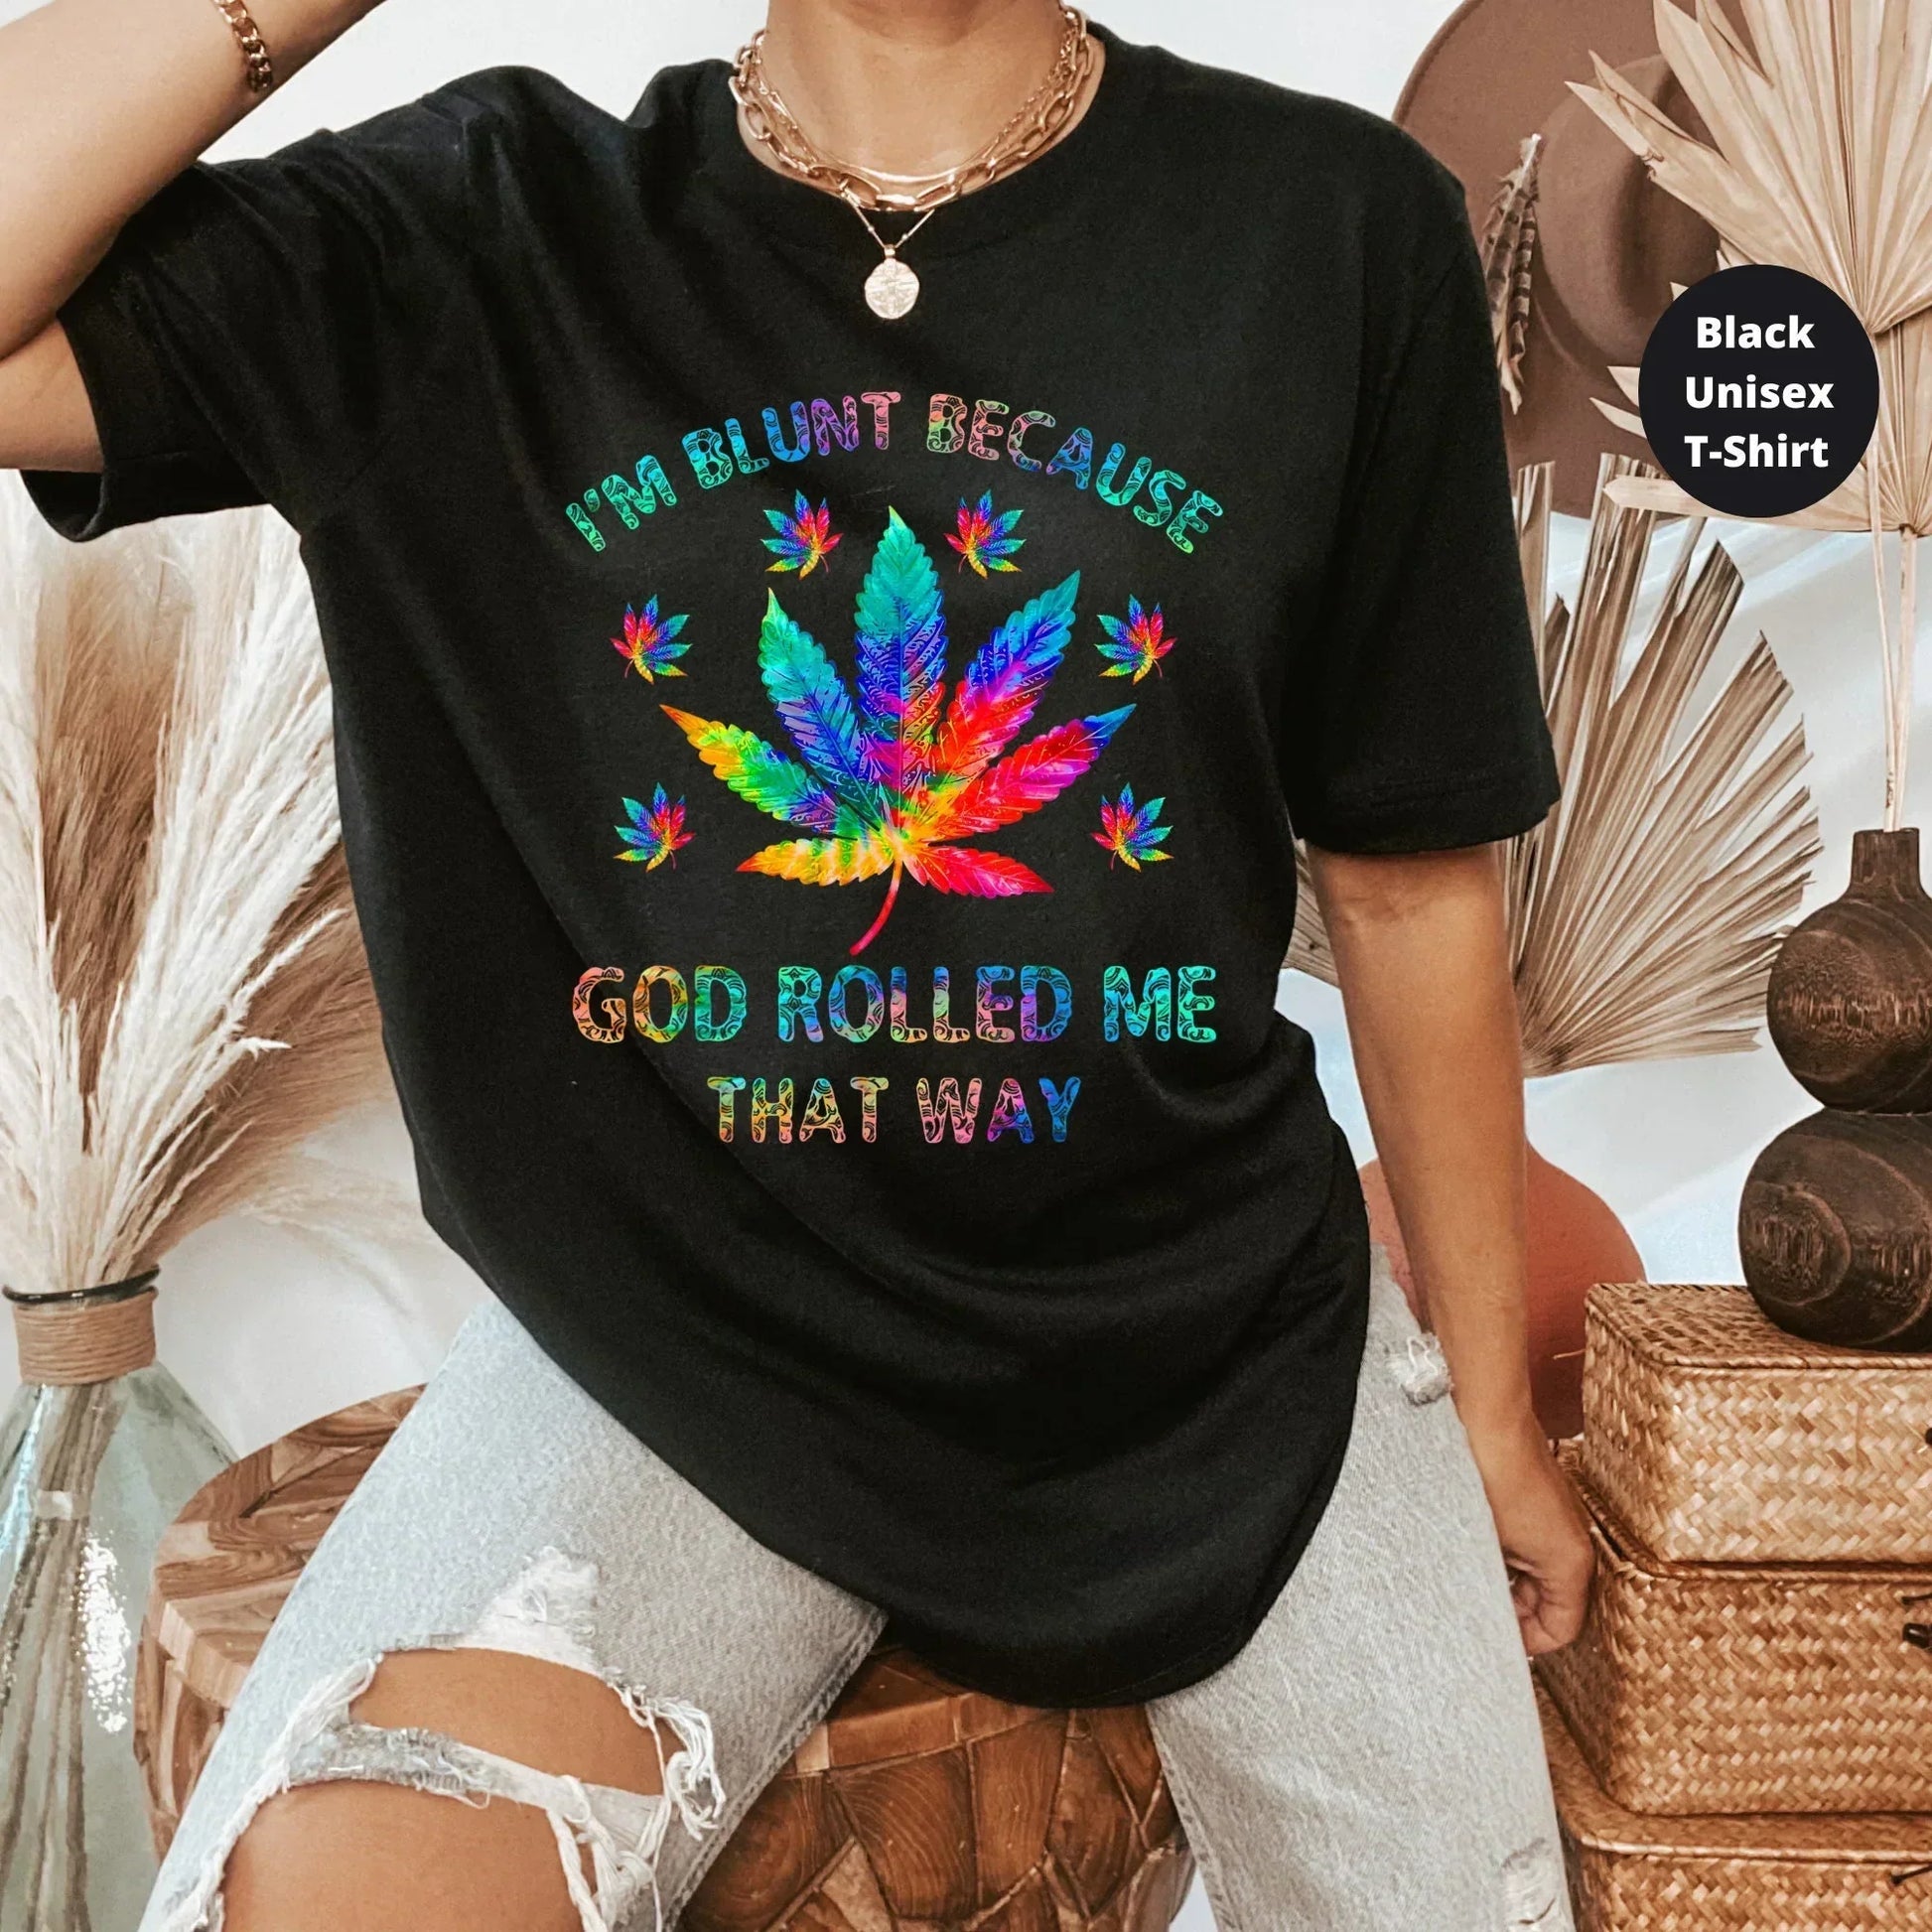 https://hmdesignstudious.com/cdn/shop/products/Stoner-Gifts-Hippie-Clothes-Weed-Gifts-420-Gift-Bluntness-Stoner-Girl-Shirt-Stoner-Gift-for-Him-Stoner-Gift-for-Her-Marijuana-T-shirts-HMDesignStudioUS-154.webp?v=1700515617&width=1946